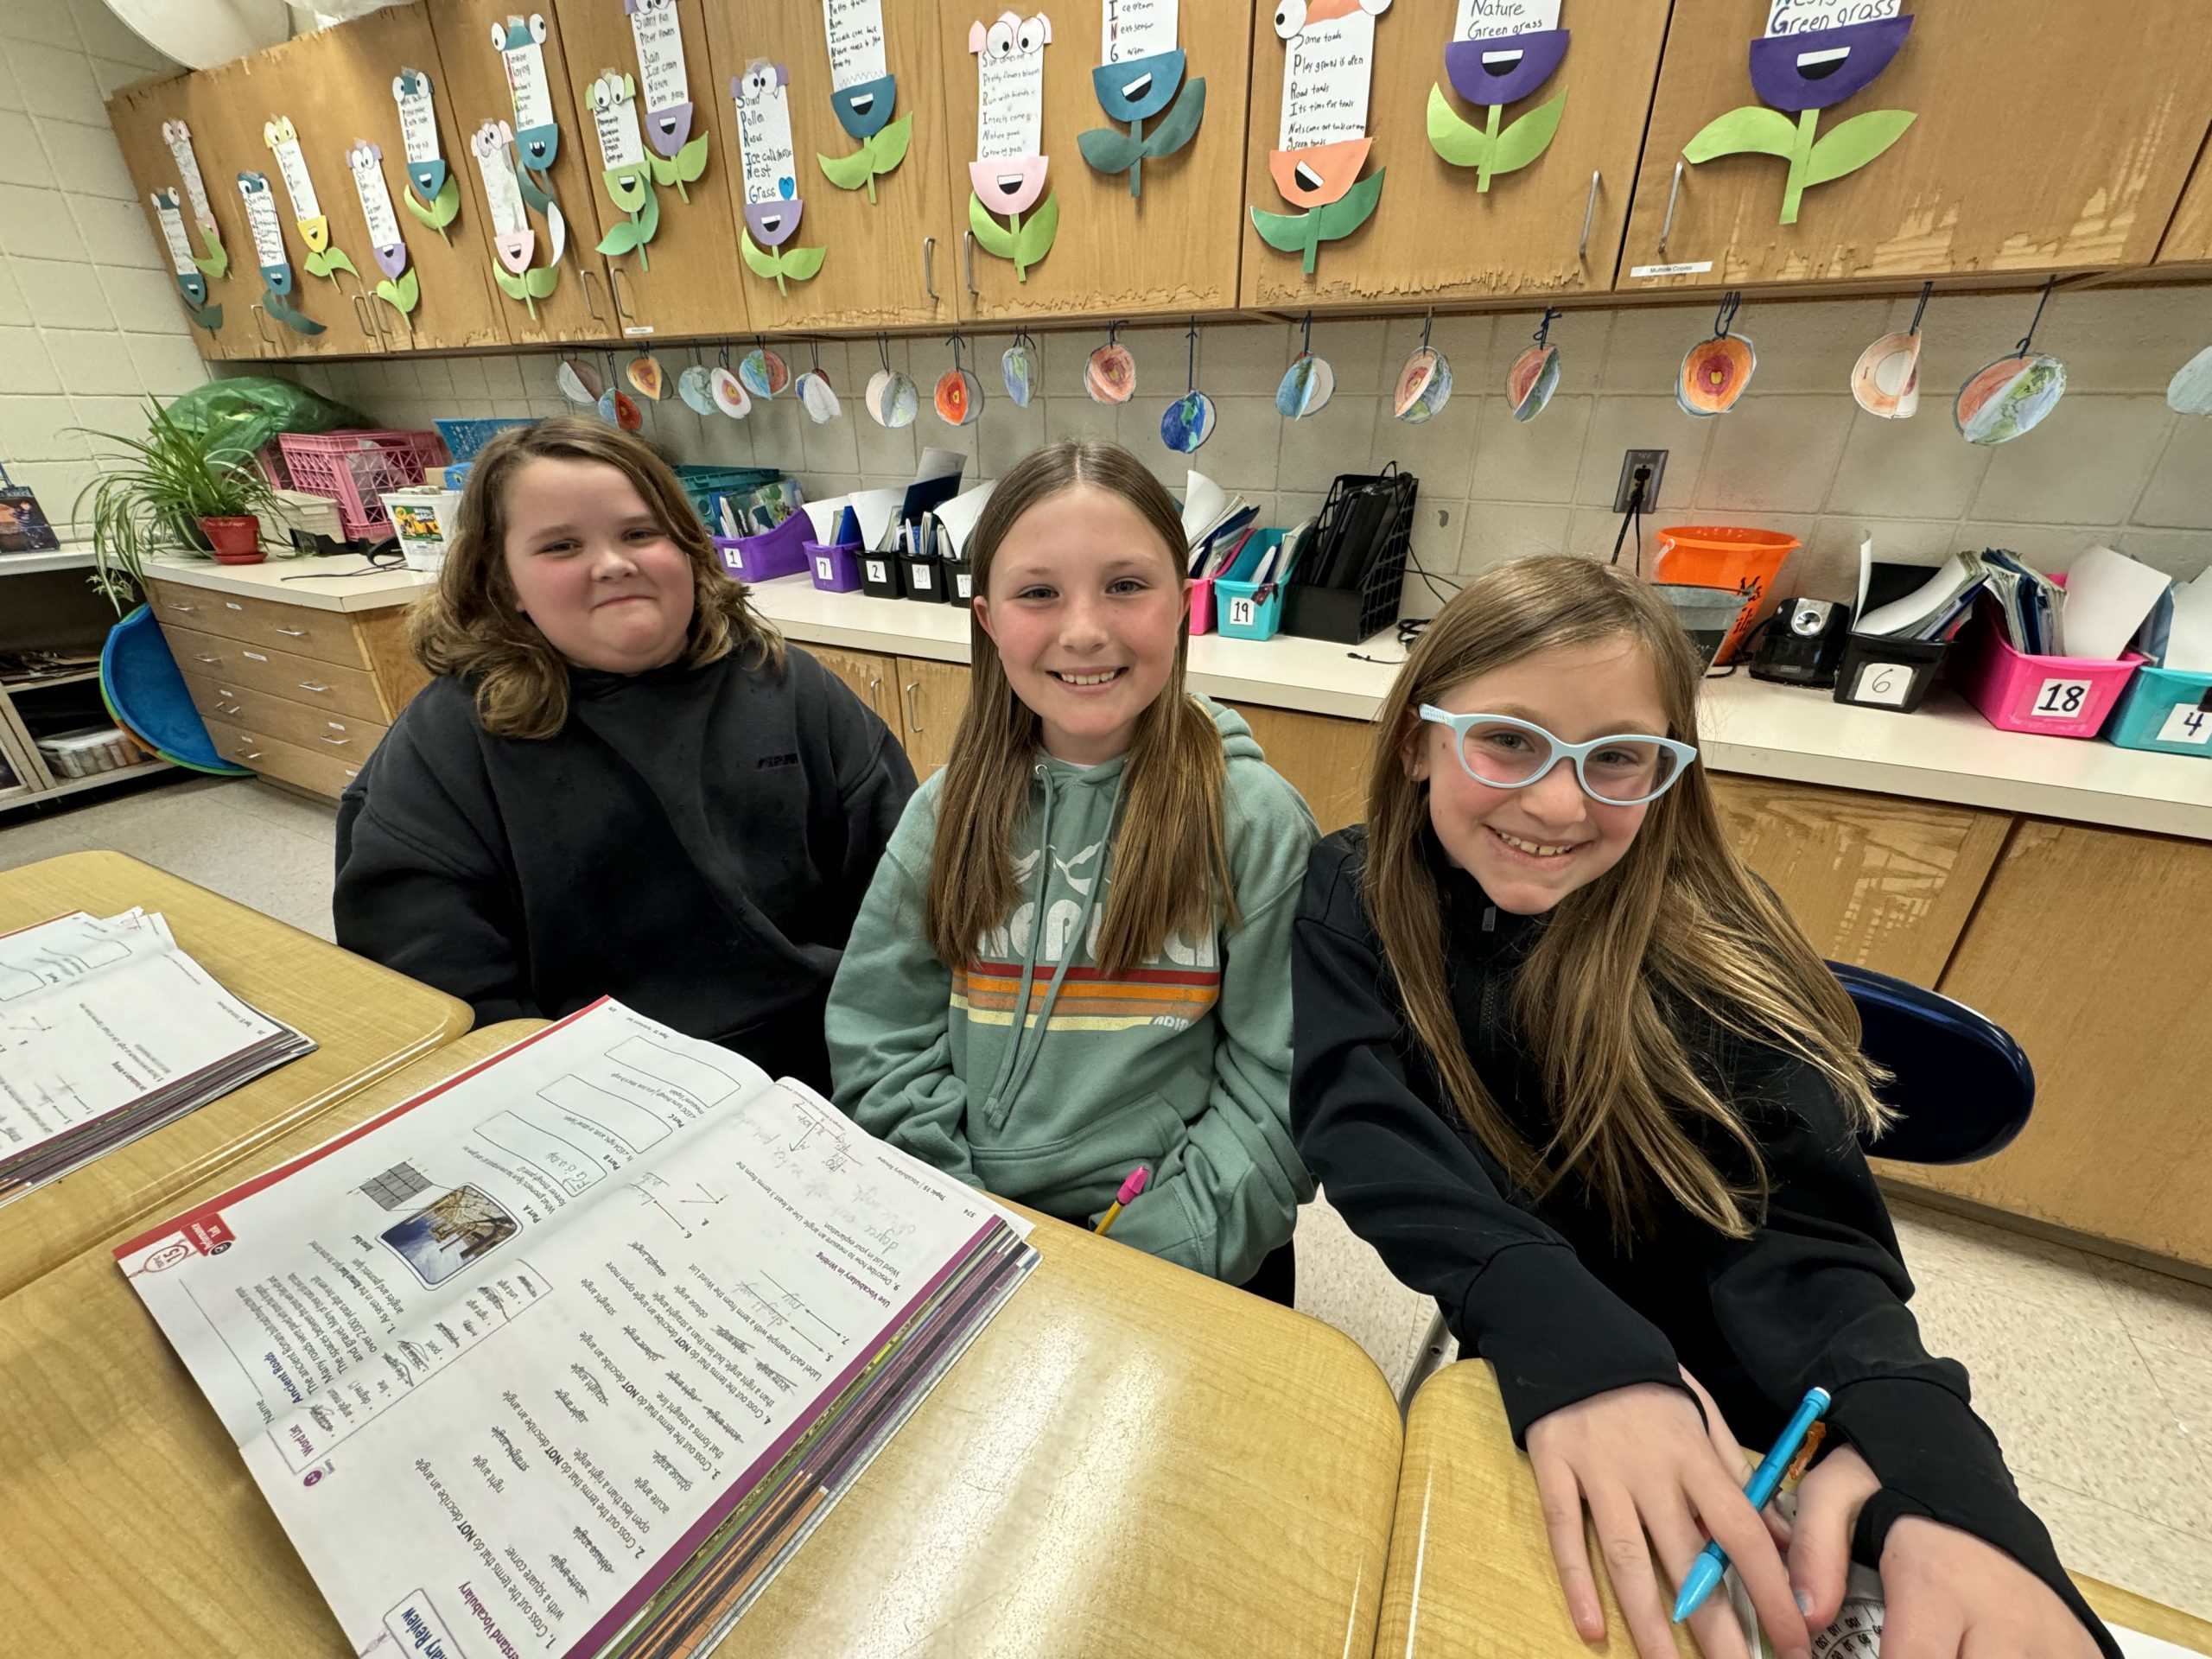 Three elementary school students pose with smiles in the classroom